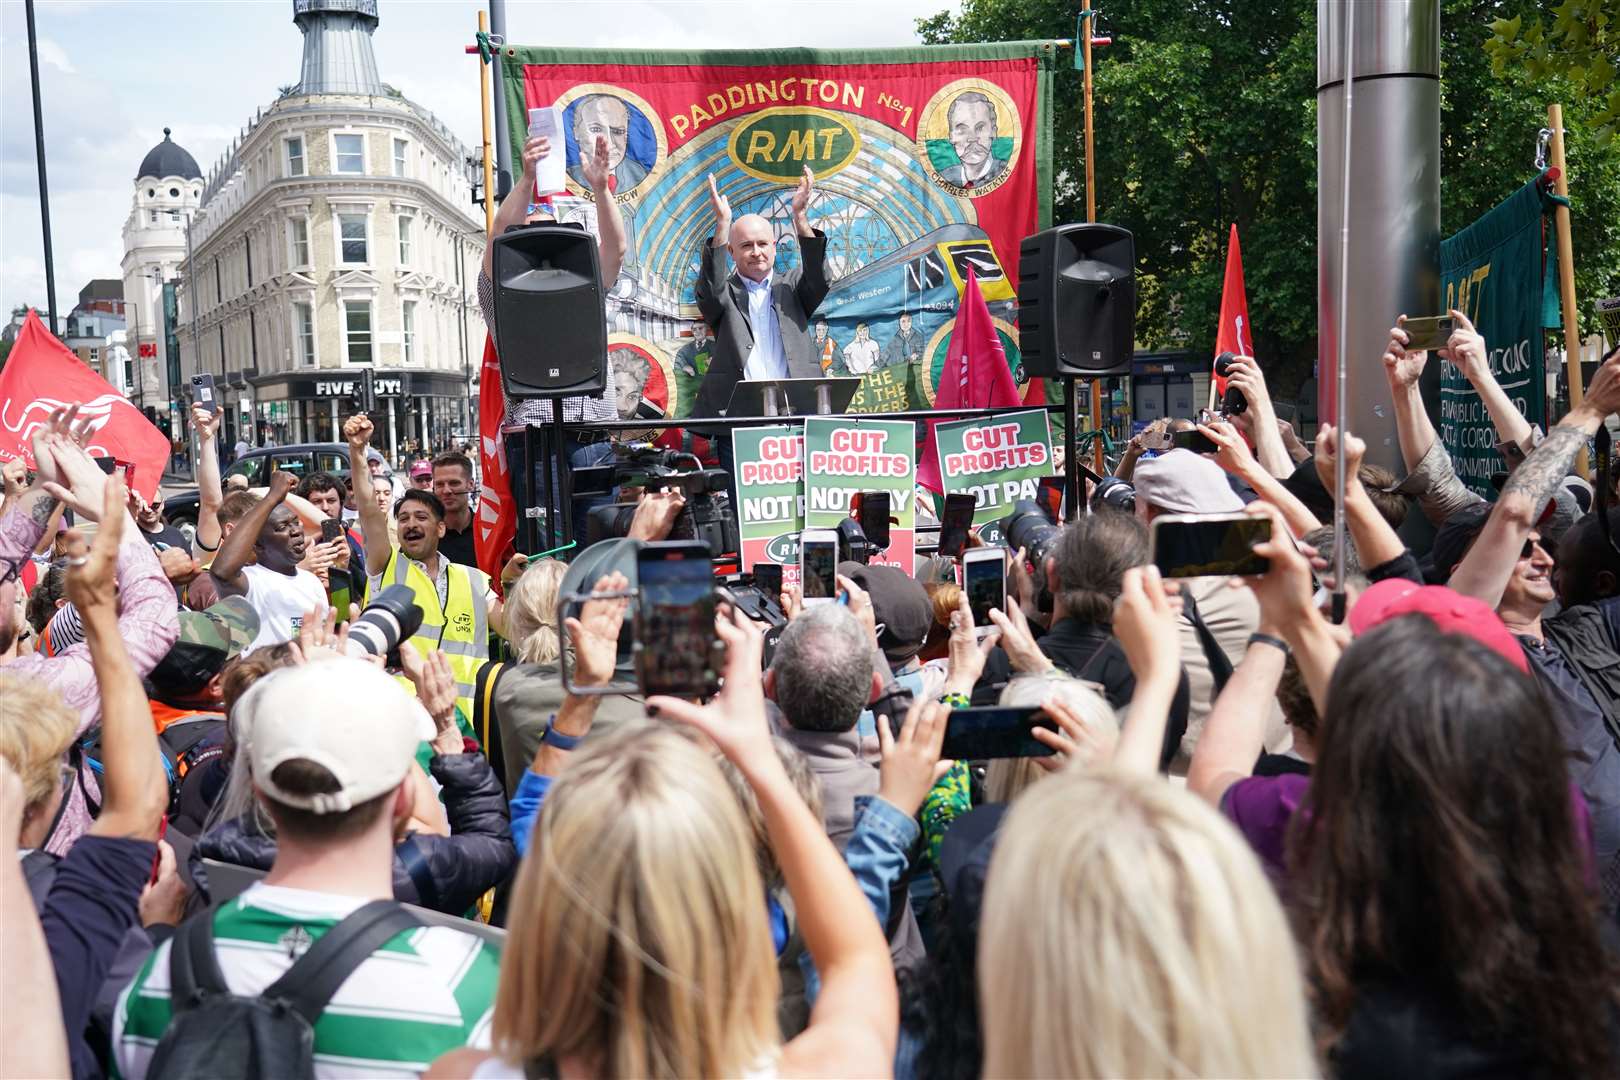 RMT general secretary Mick Lynch speaking at a rally outside King’s Cross station in London (Dominic Lipinski/PA)